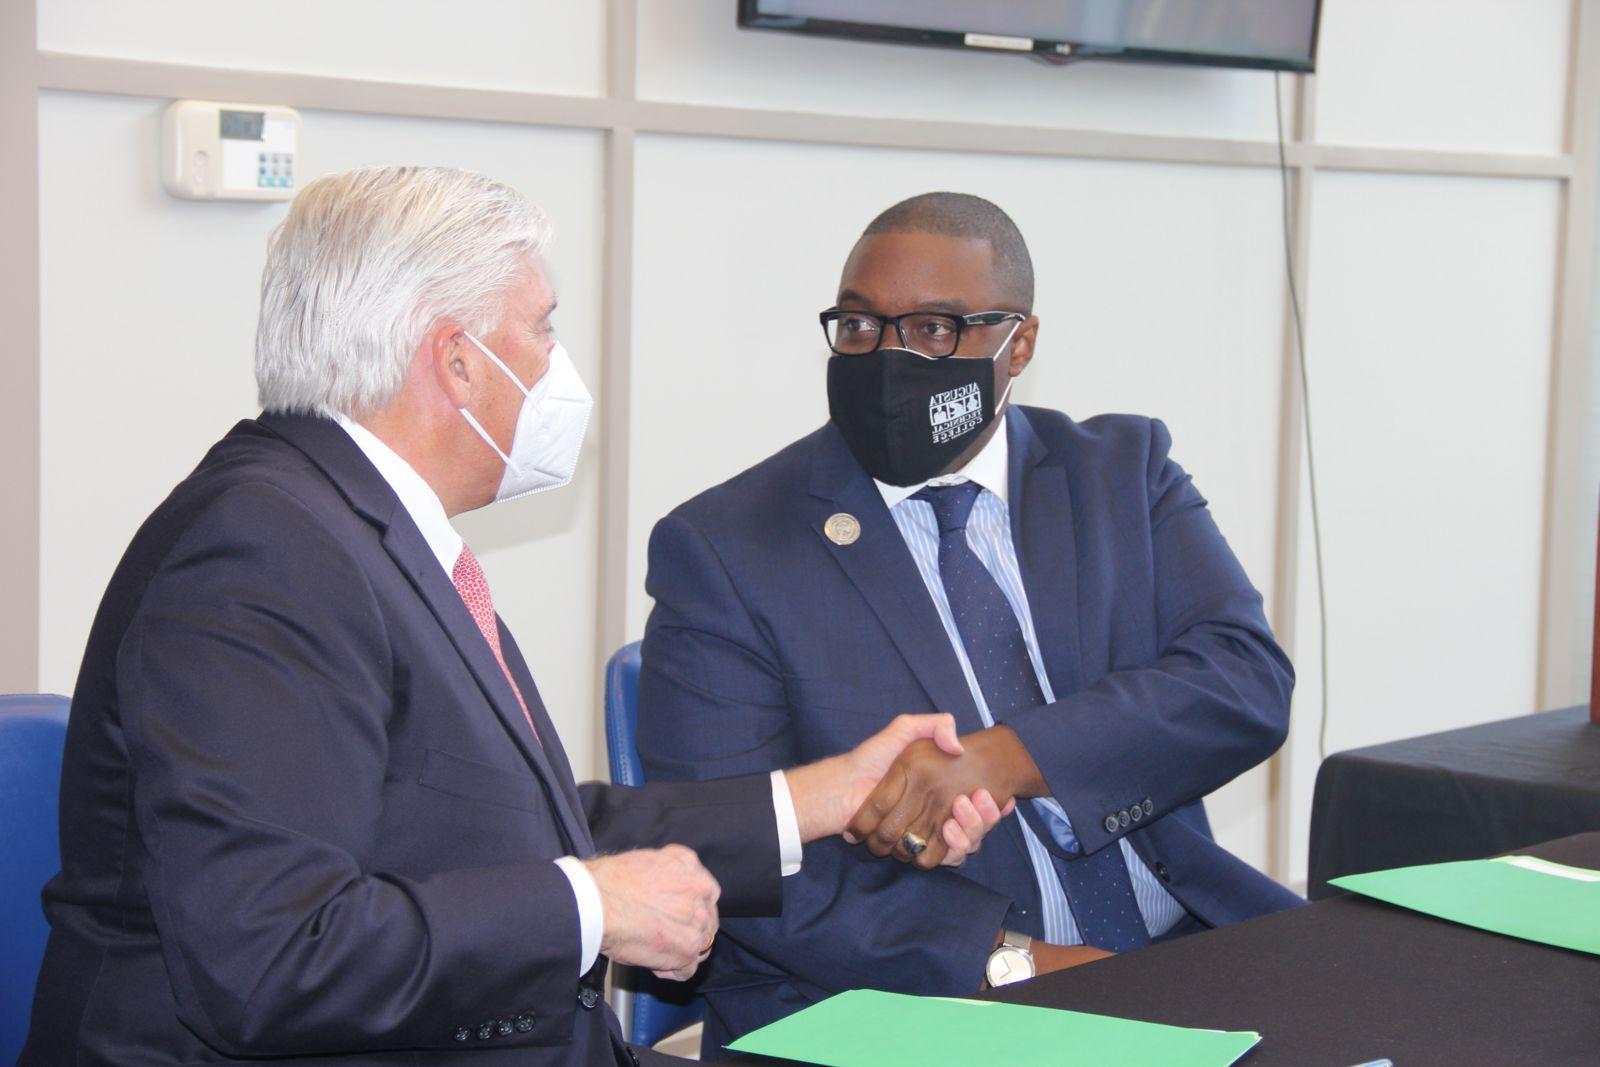 President of Augusta Technical College, Dr. Jermaine Whirl, shakes hands with University Health Care System Chief Executive Officer, James R. Davis.